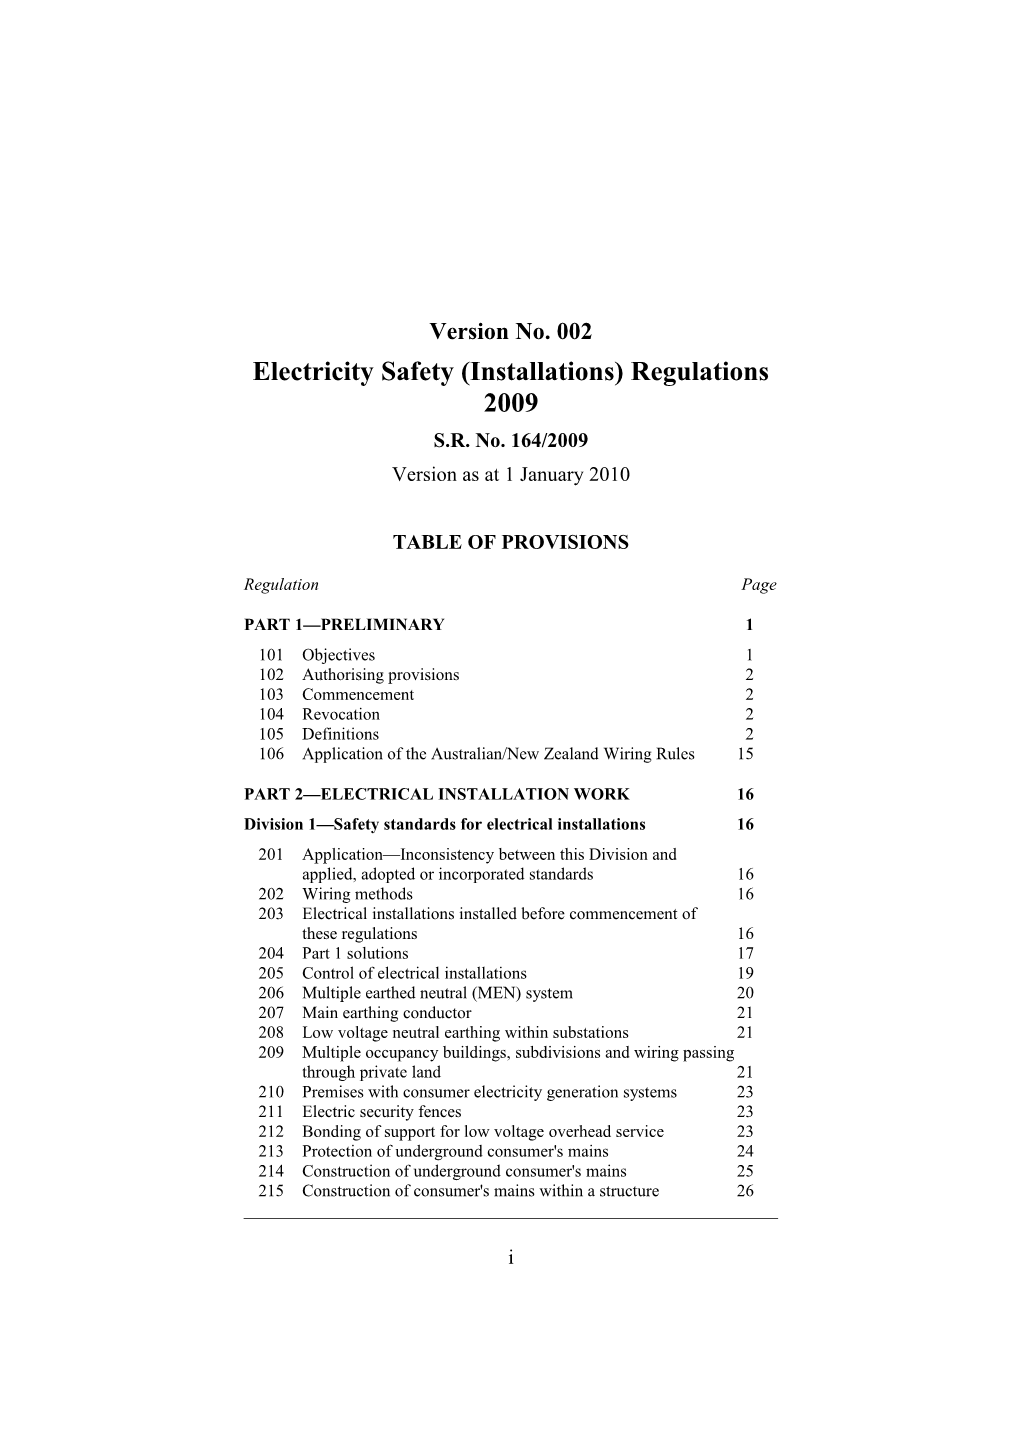 Electricity Safety (Installations) Regulations 2009